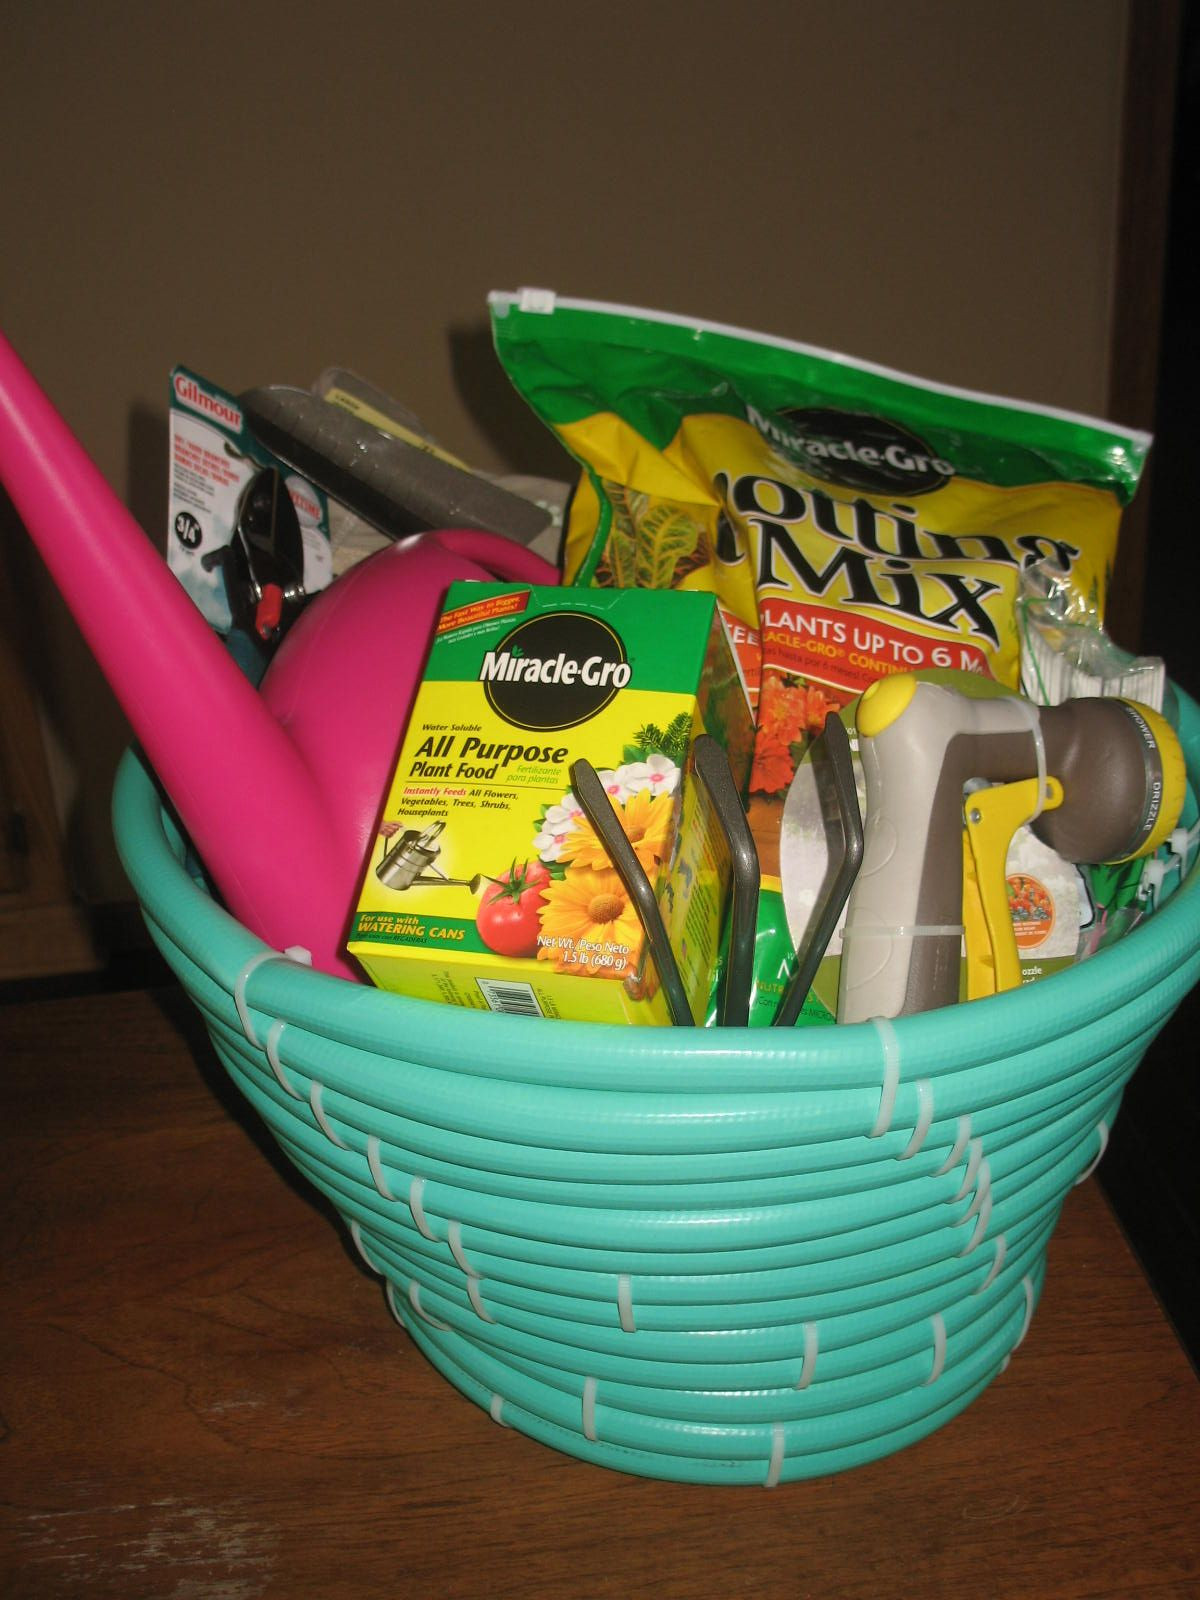 Gardening Gift Basket Ideas
 Homemade hose gardeners t basket Perfect t for the